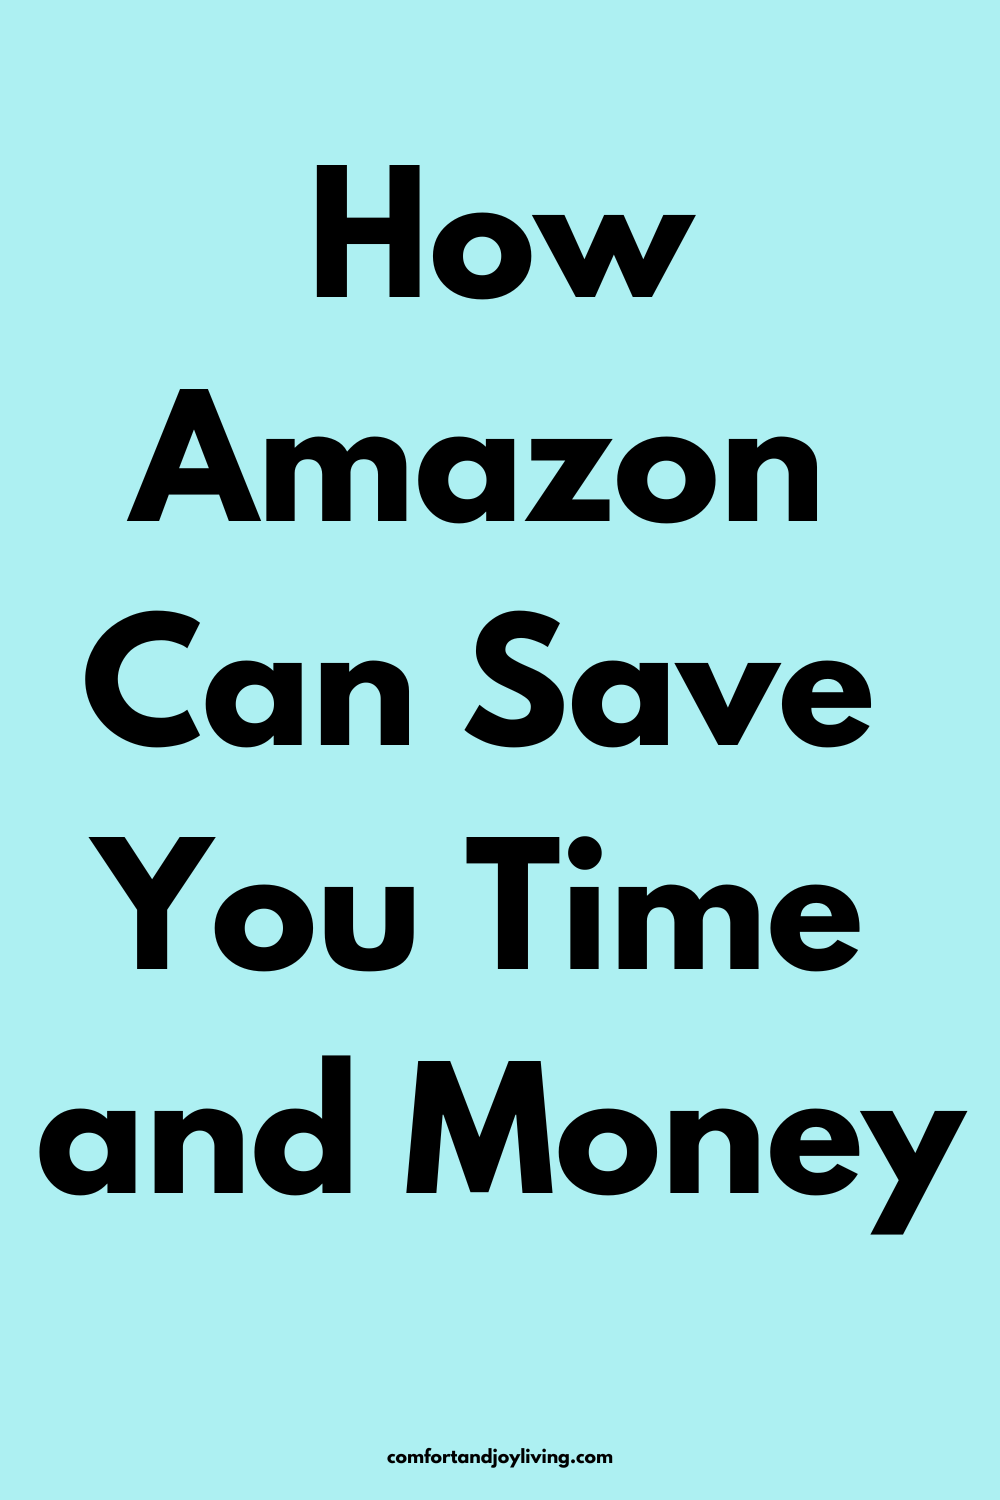 How Amazon Can Save You Time and Money